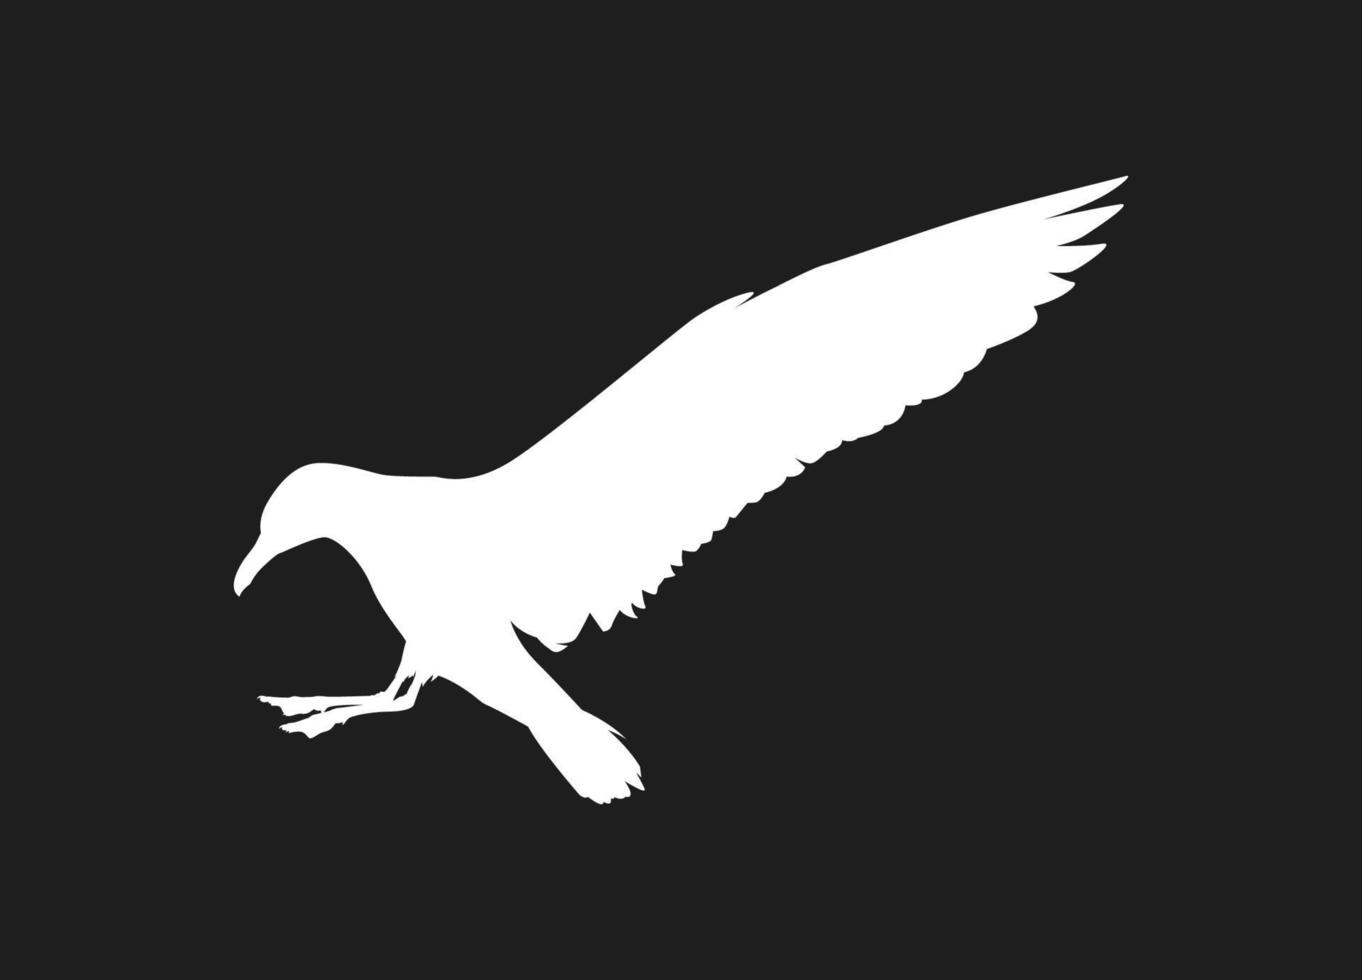 Flying bird of white silhouettes isolated on black background. Fit for logo, symbol, banner, bakcground, tattoo, apparel. Bird element vector. Eps 10 vector